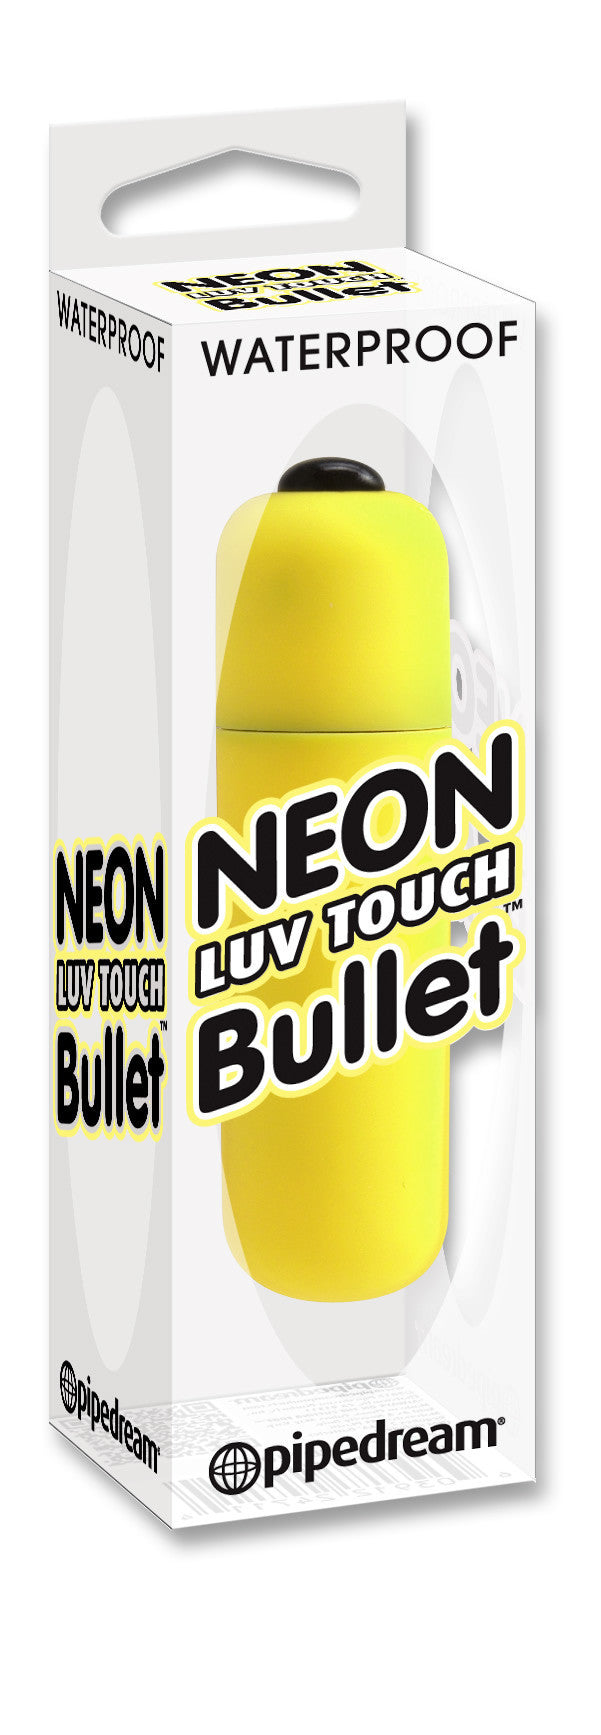 Neon Luv Touch Bullet  - Club X